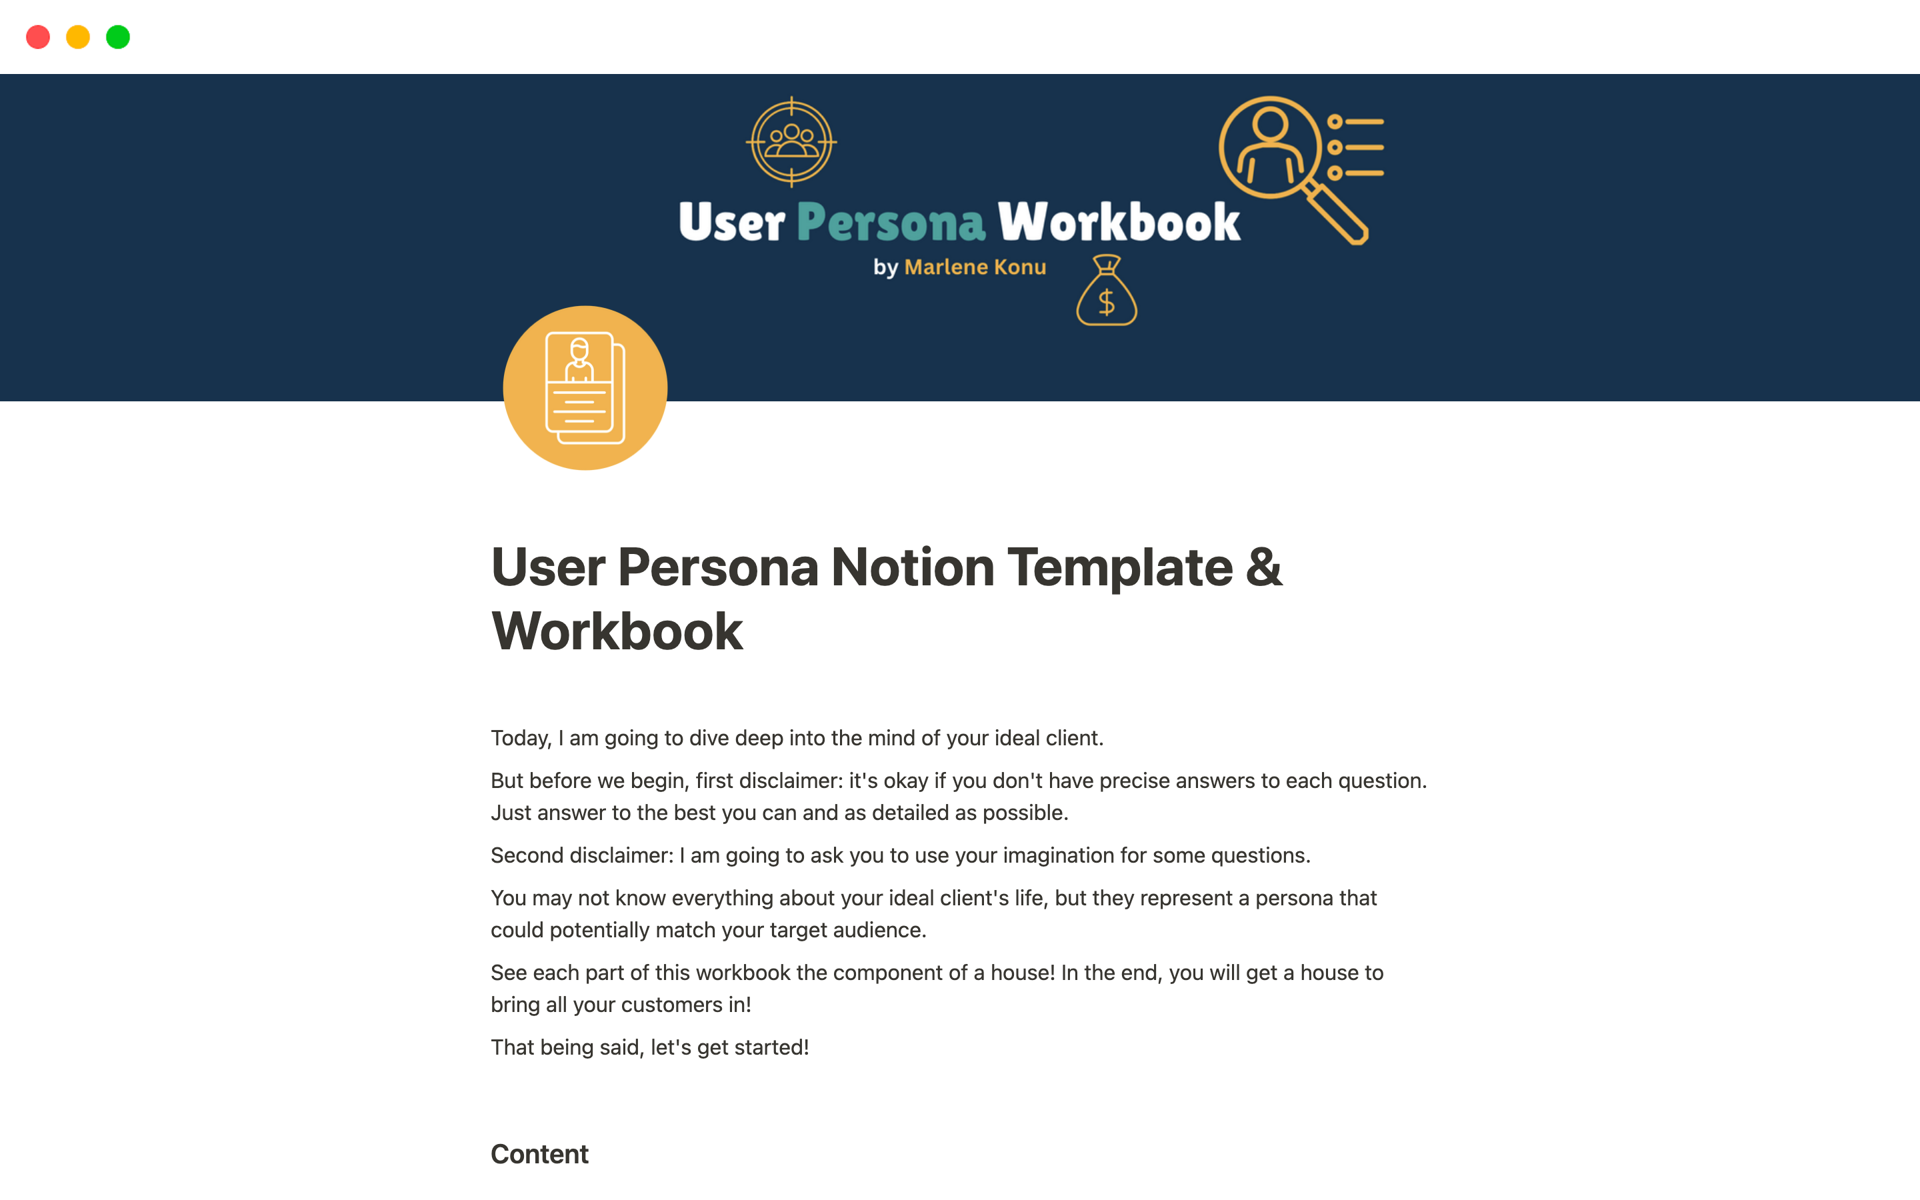 A template preview for User Persona Notion Template & Workbook